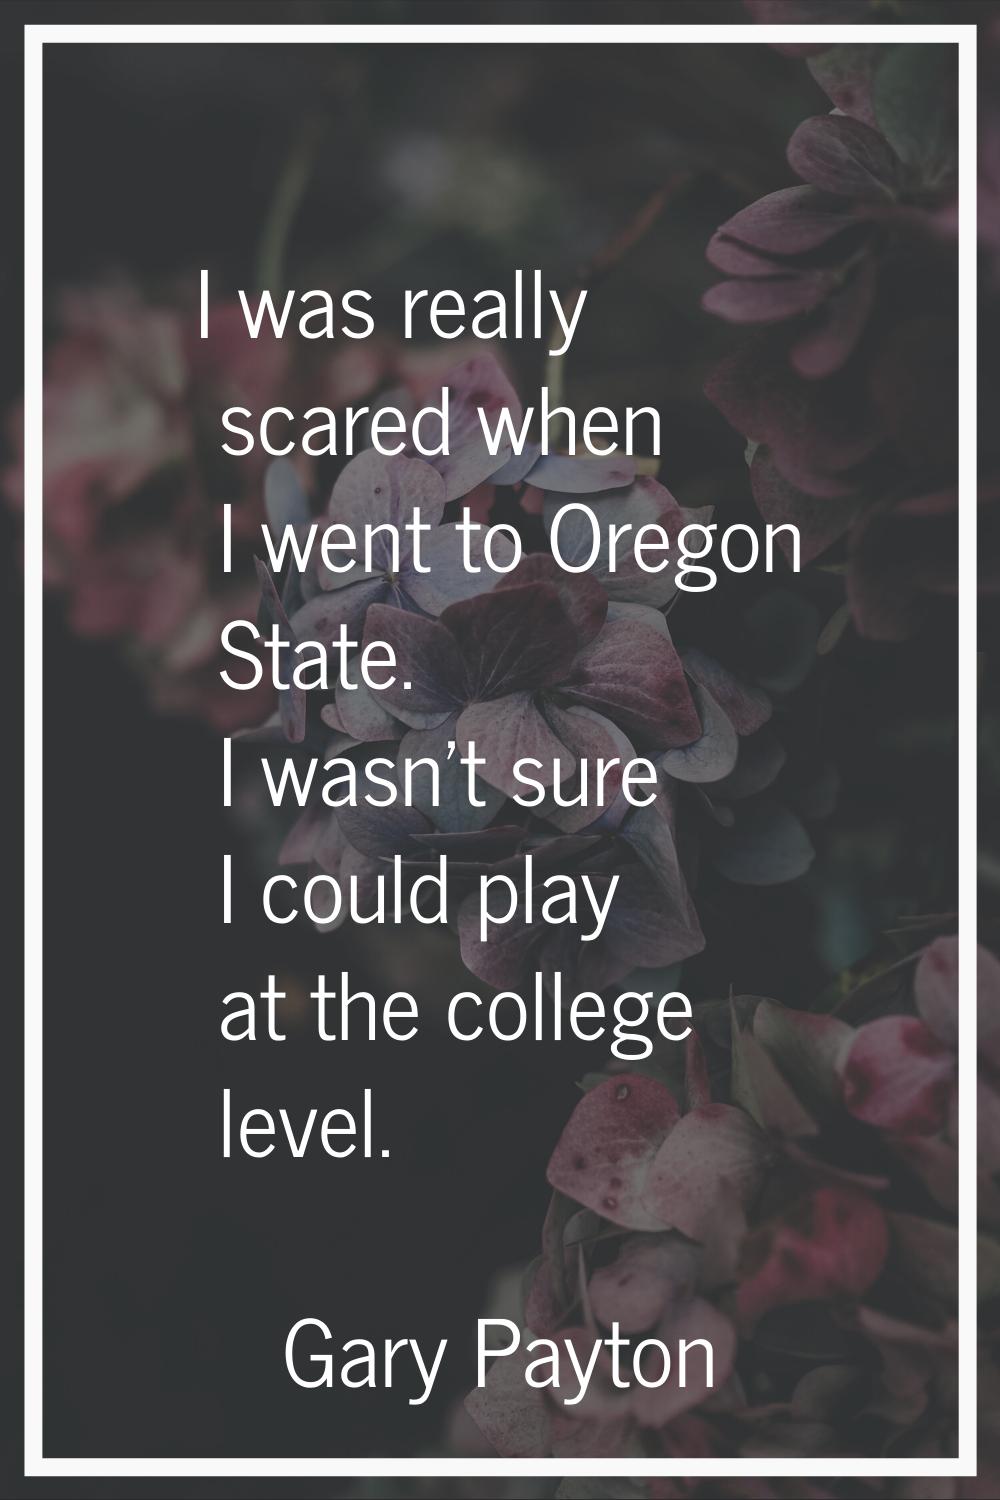 I was really scared when I went to Oregon State. I wasn't sure I could play at the college level.